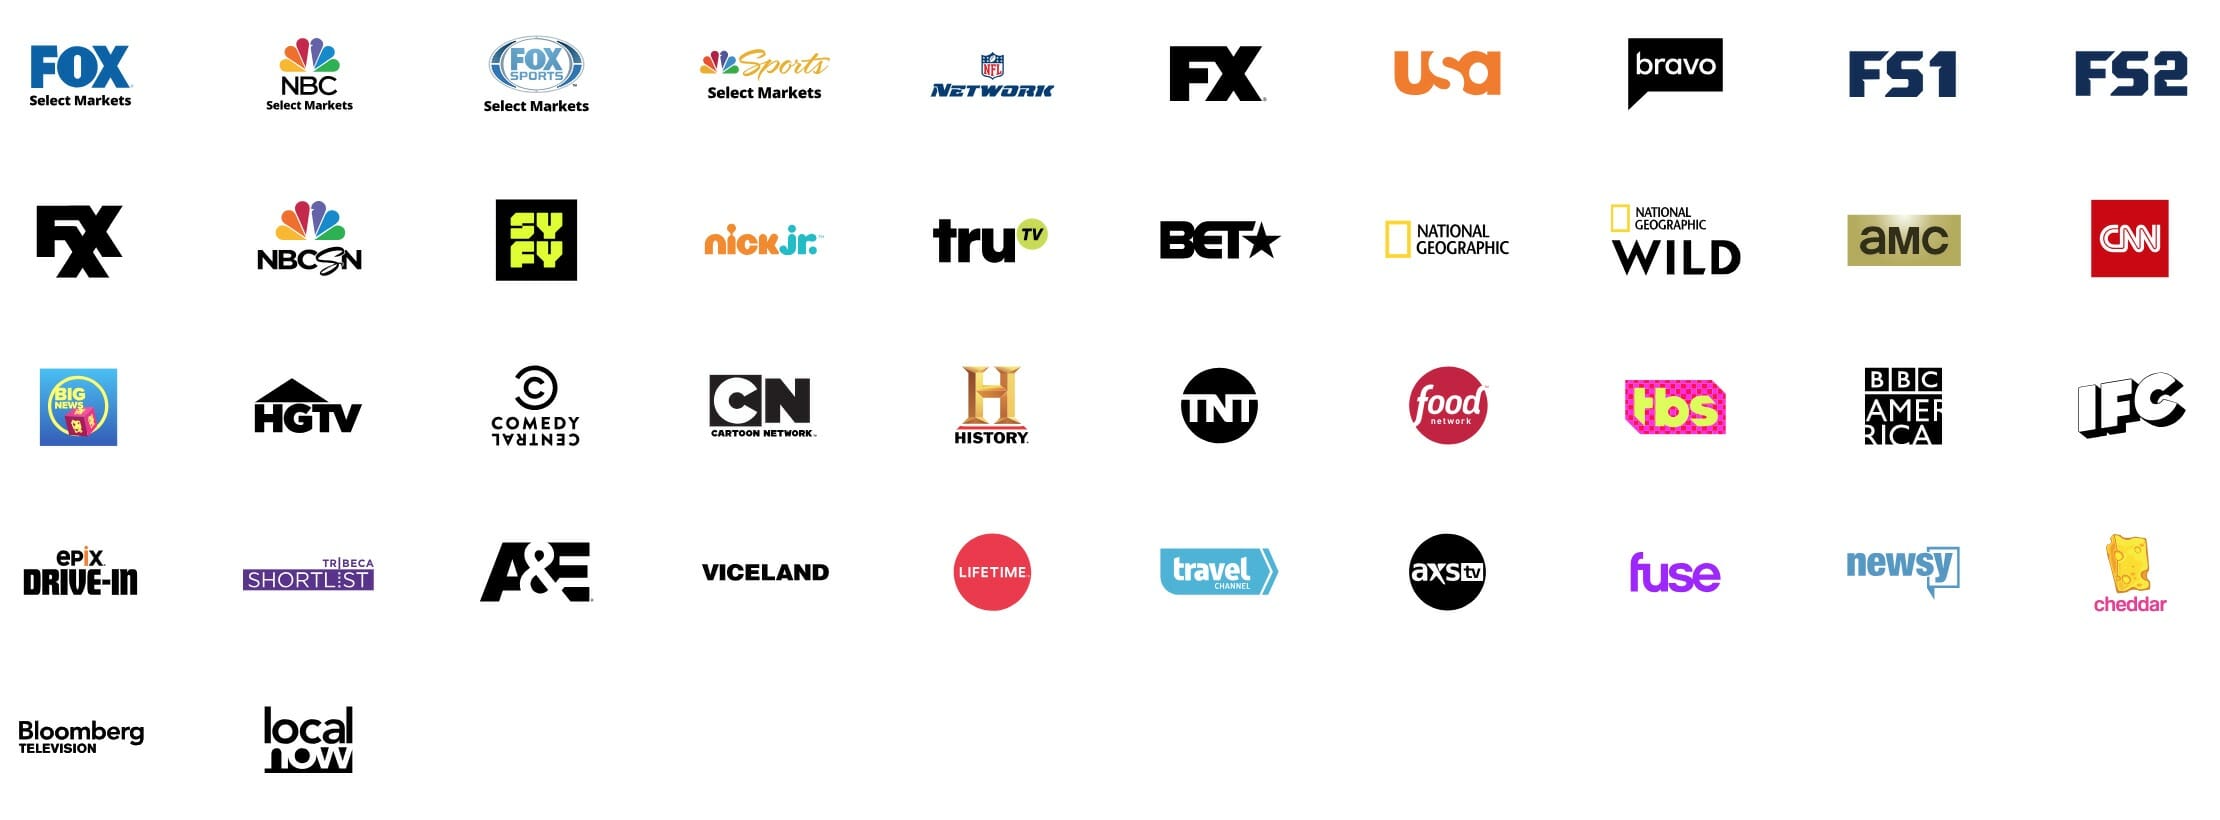 Sling TV Review The Best All-In-One Solution to Cable—For Now